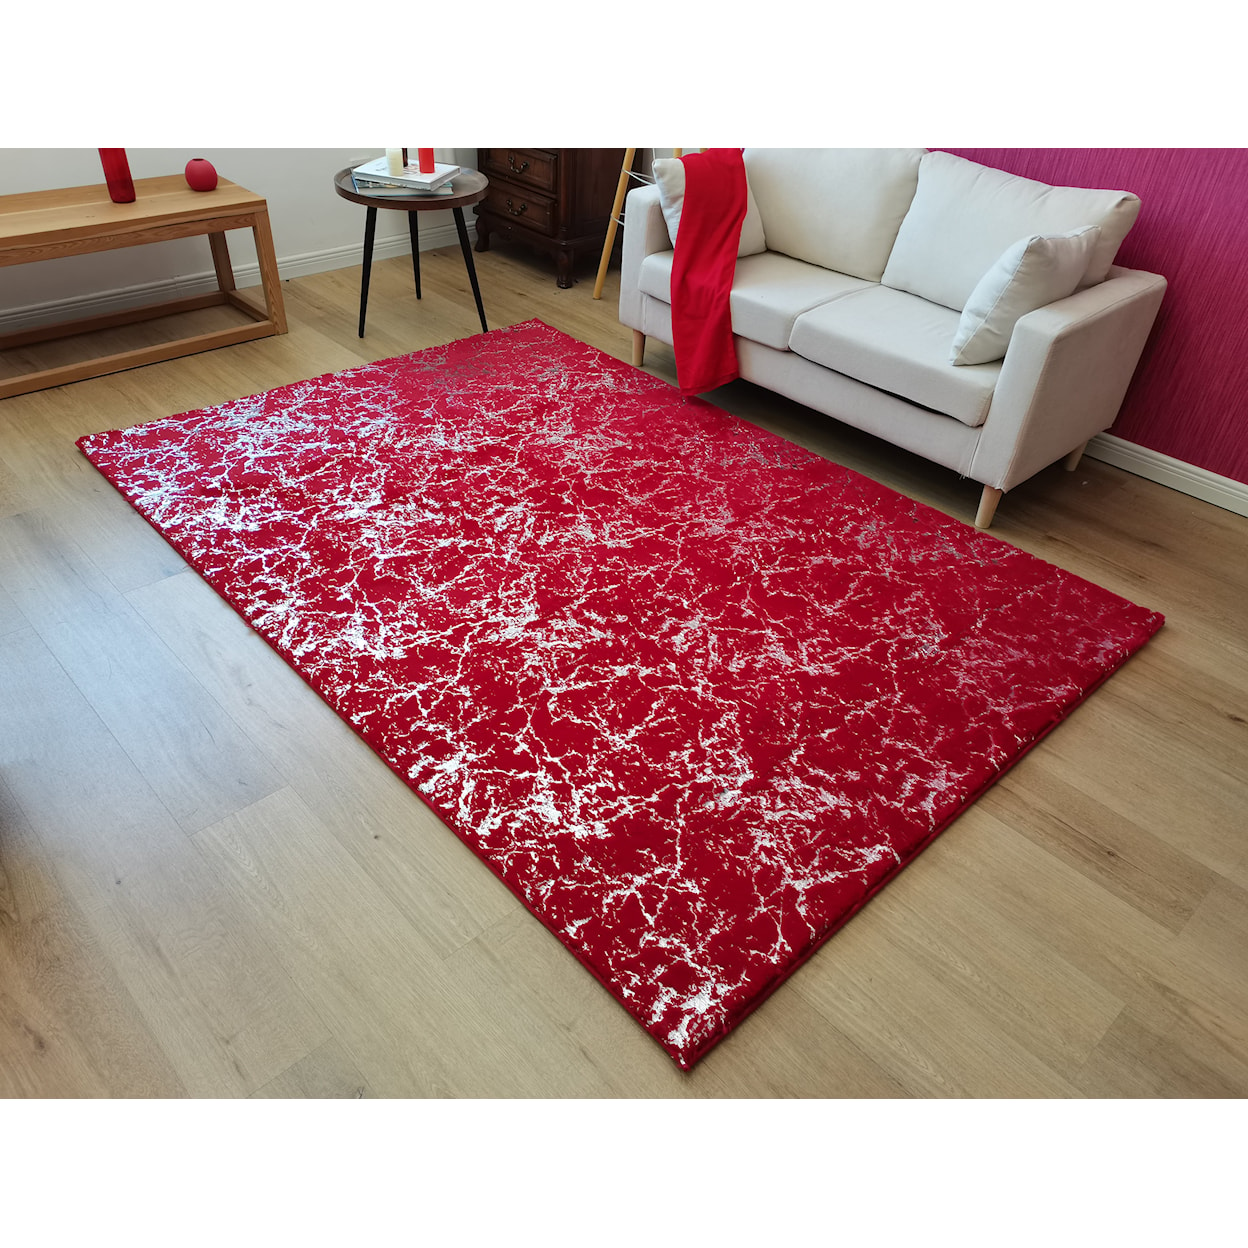 Zinatex Timmy Shaggy S Edition RED SILVER 5X8 AREA RUG |